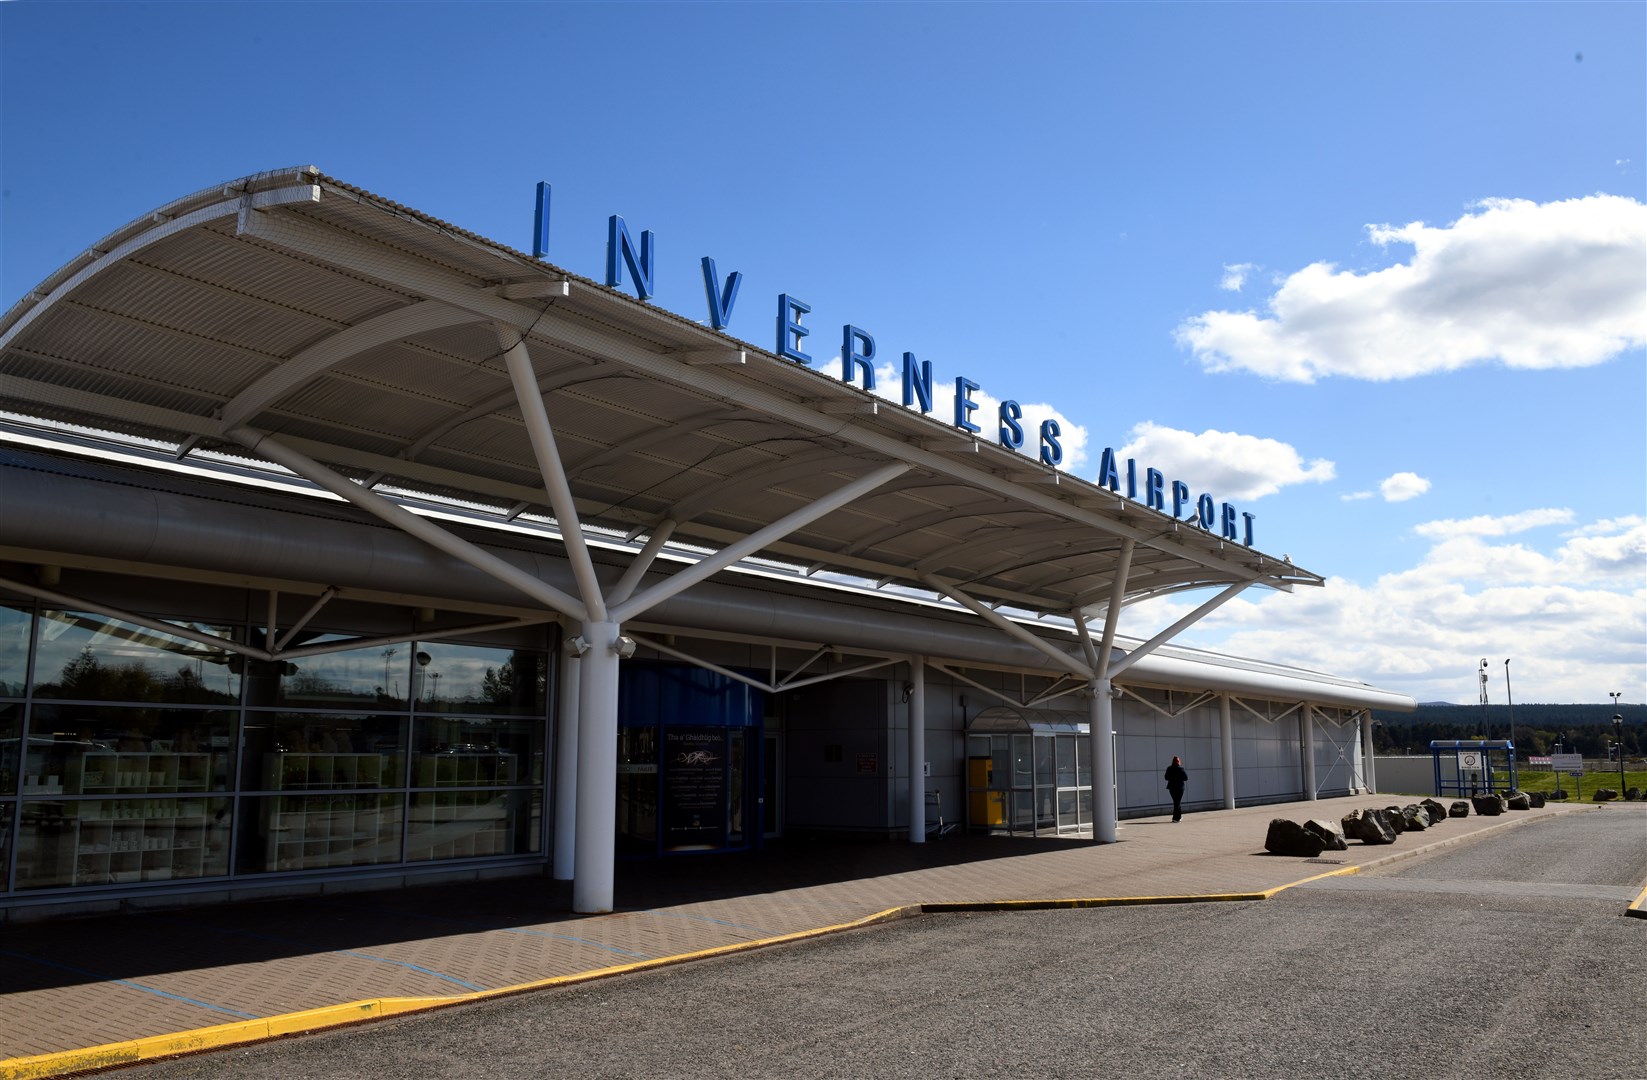 Bad weather in London led to the cancellation of two flights from Inverness Airport this morning.